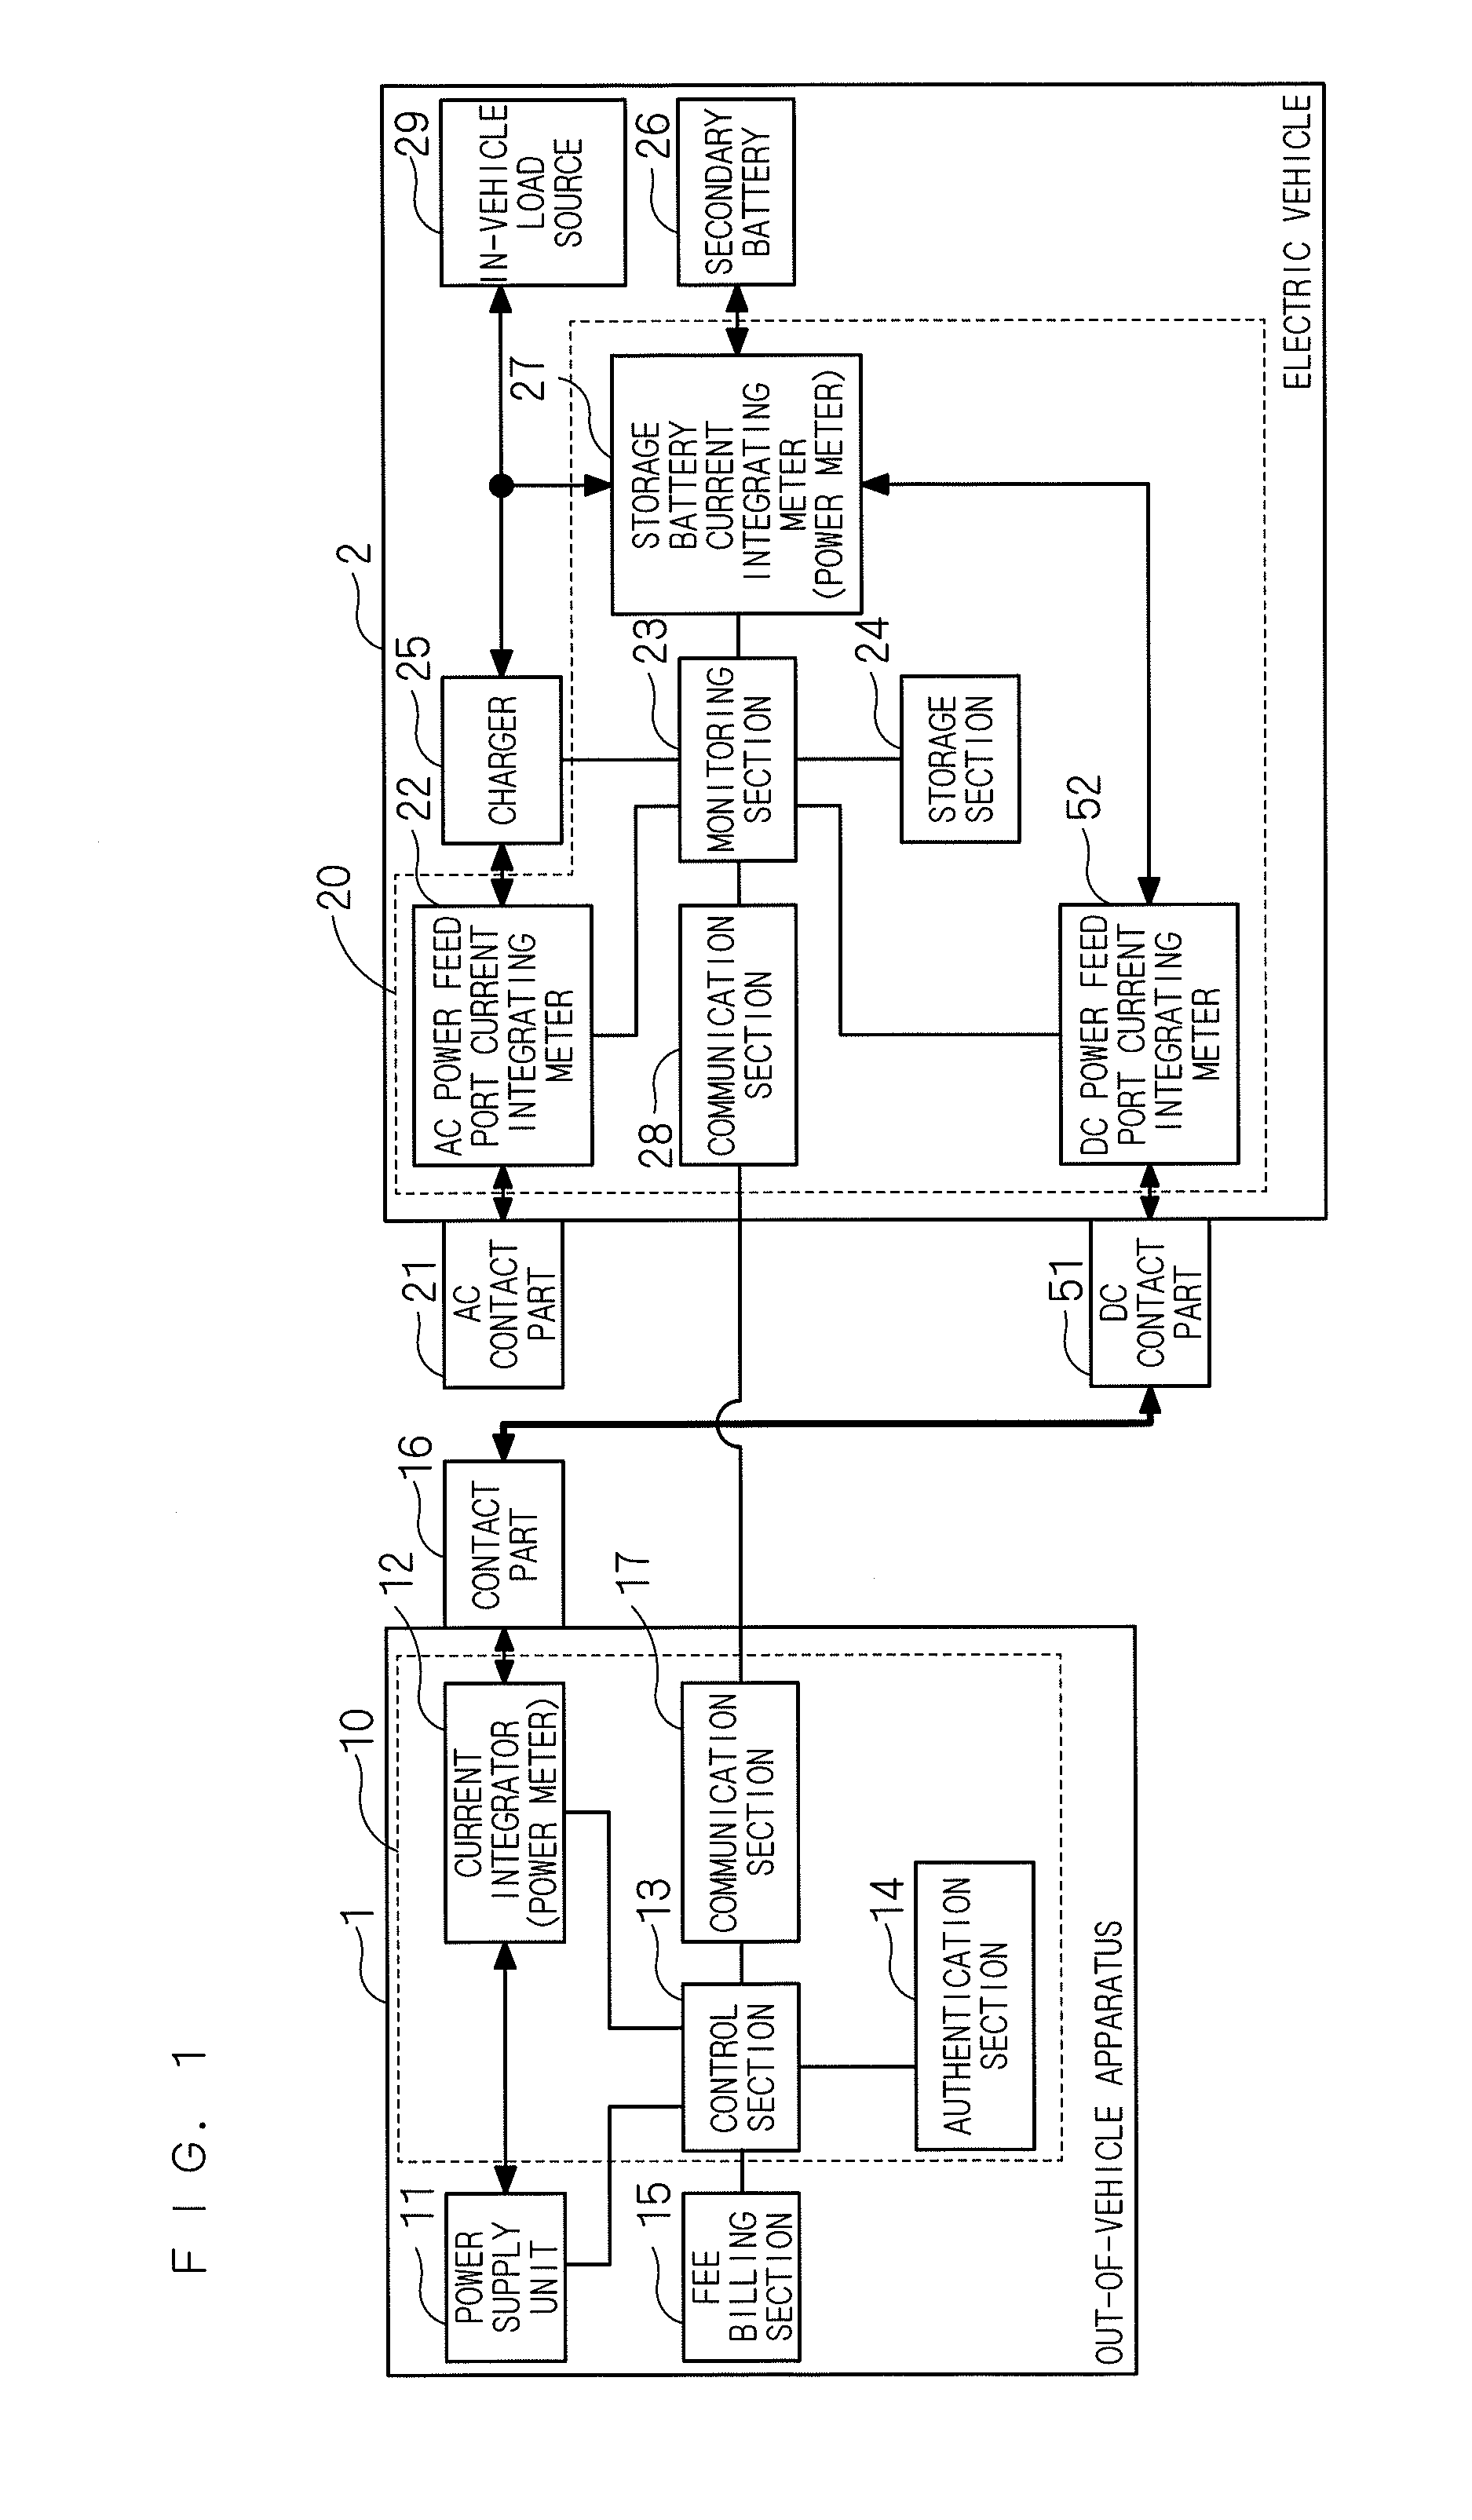 Power monitoring system and electric vehicle